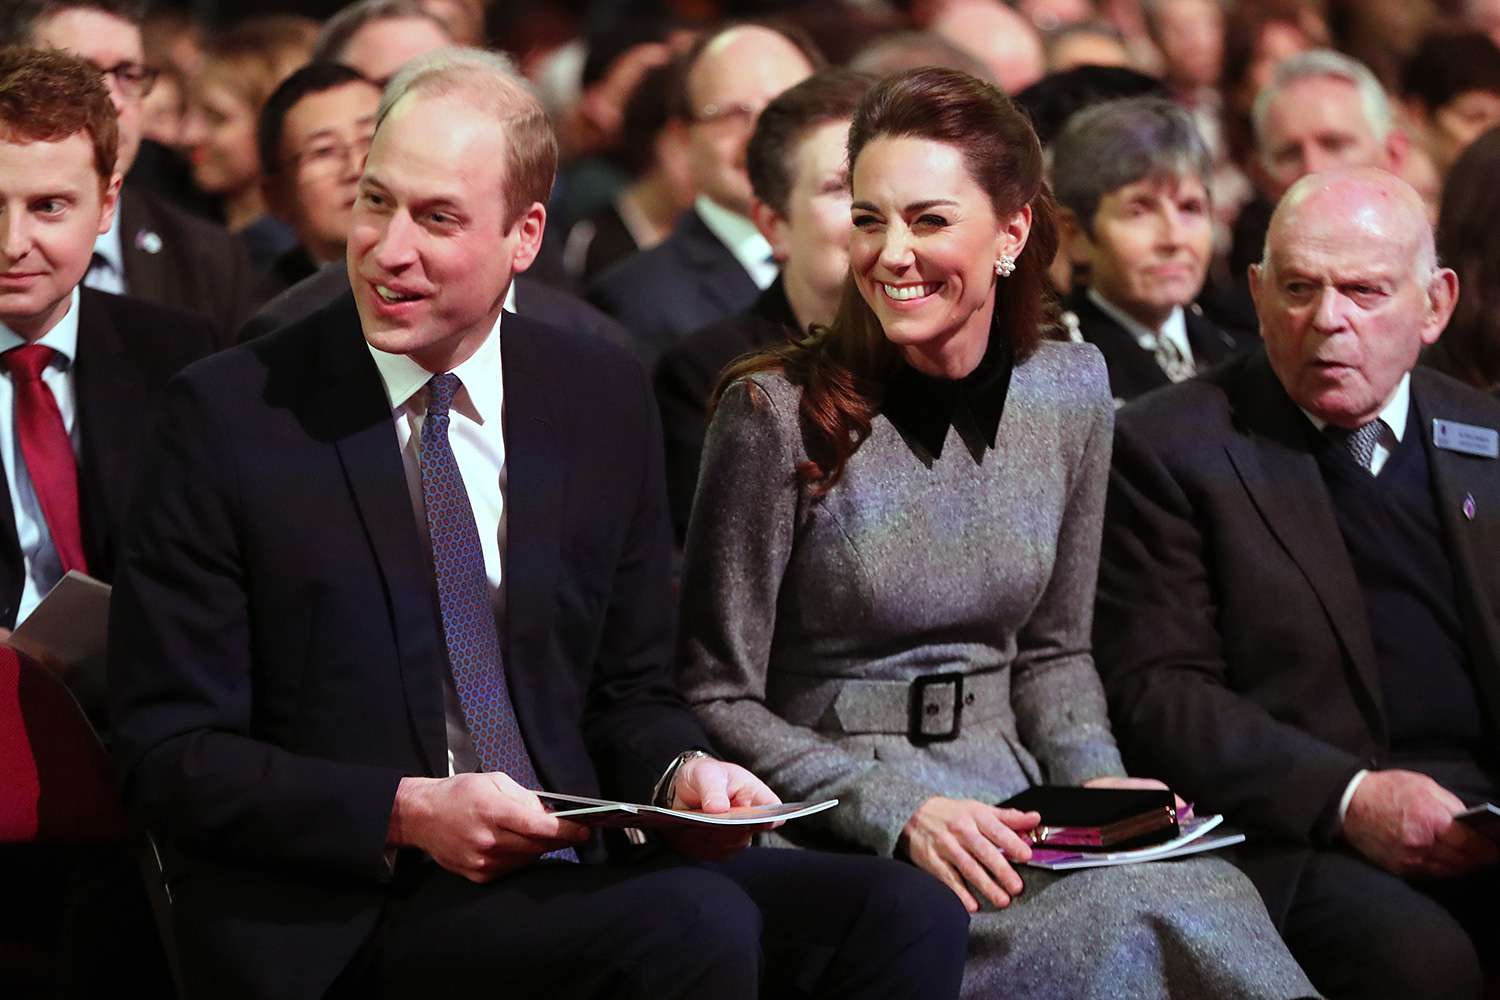 Prince William, Duke of Cambridge and Catherine, Duchess of Cambridge attend the UK Holocaust Memorial Day Commemorative Ceremony in Westminster on January 27, 2020 in London, England